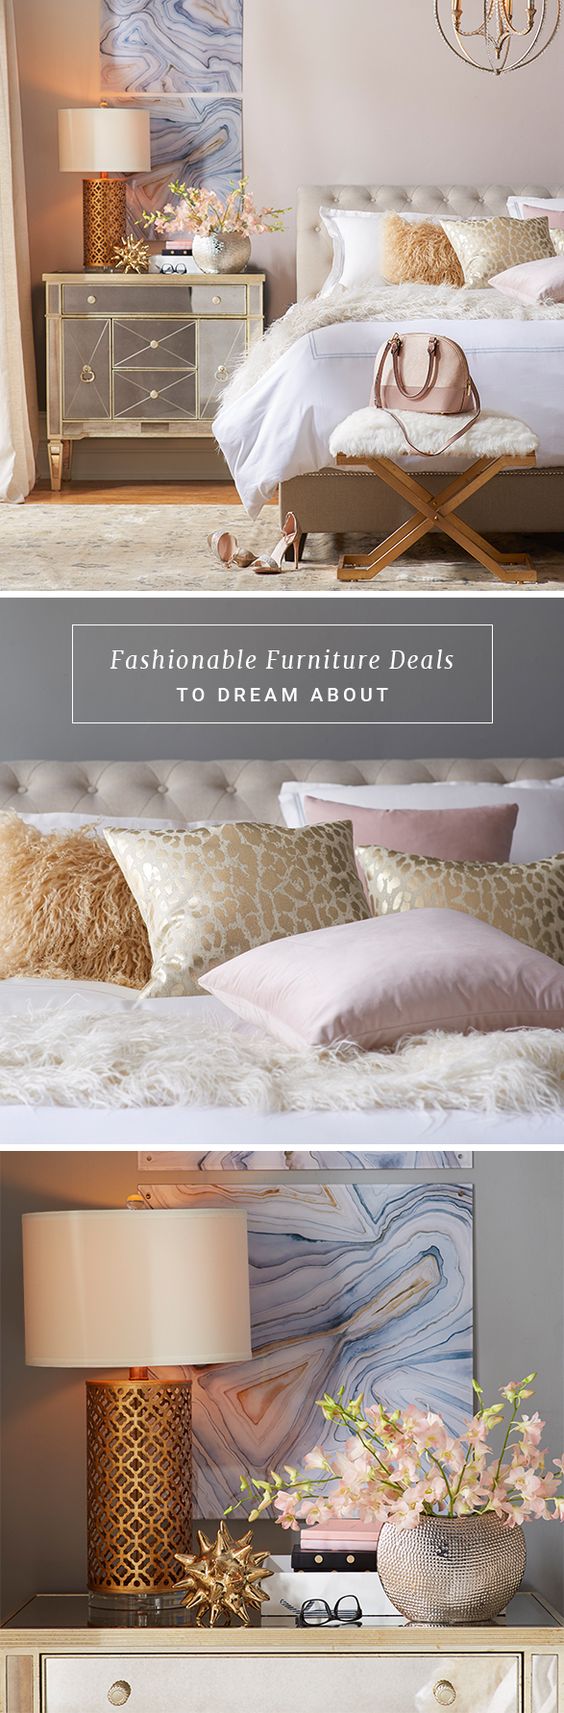 Invest in a look you’ll always love with always-in-style bedroom furniture at irresistible prices from Joss & Main. Then, craft the bedroom oasis of your dreams with down comforters, luxurious bedding, and more.